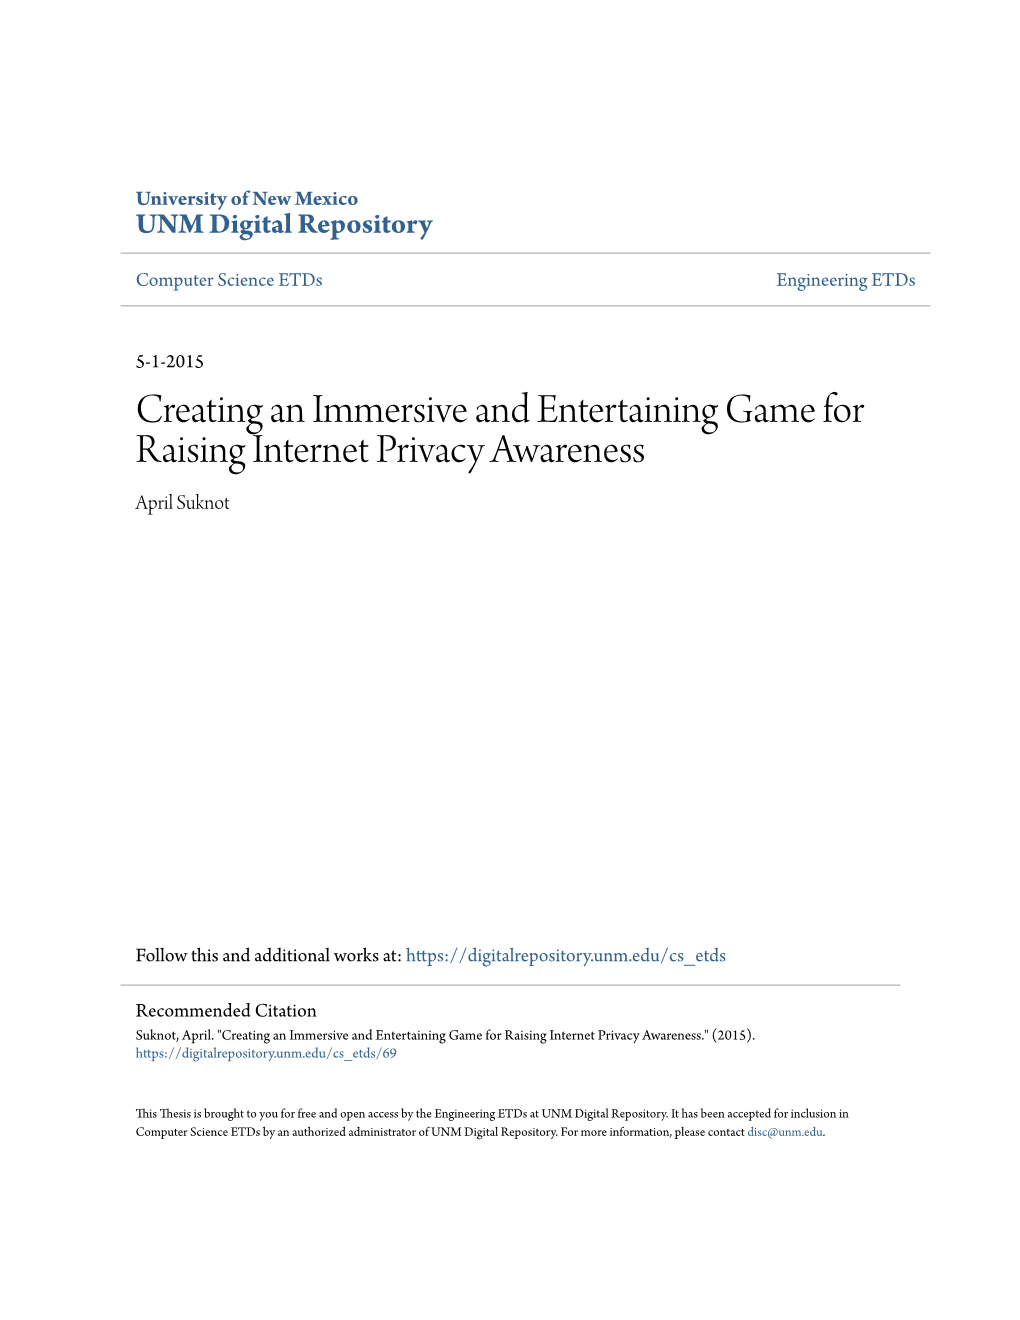 Creating an Immersive and Entertaining Game for Raising Internet Privacy Awareness April Suknot